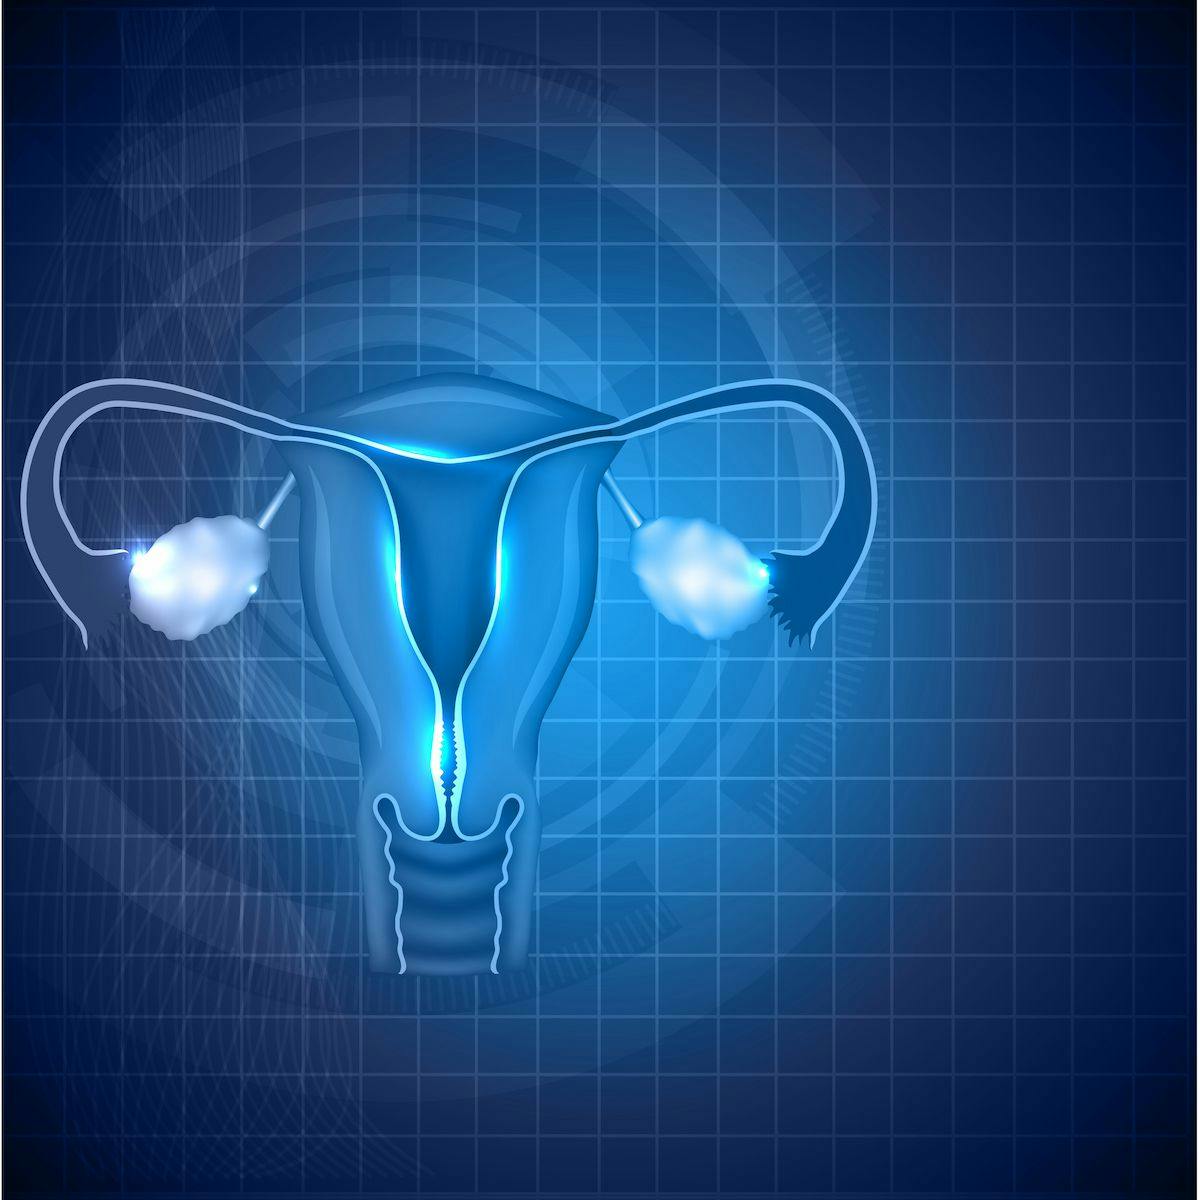 Although patients with endometrial cancer who had histologically confirmed endometriosis/adenomyosis achieved better overall survival than those without, the benefit was linked to stage, grade, age, and histological subtype.